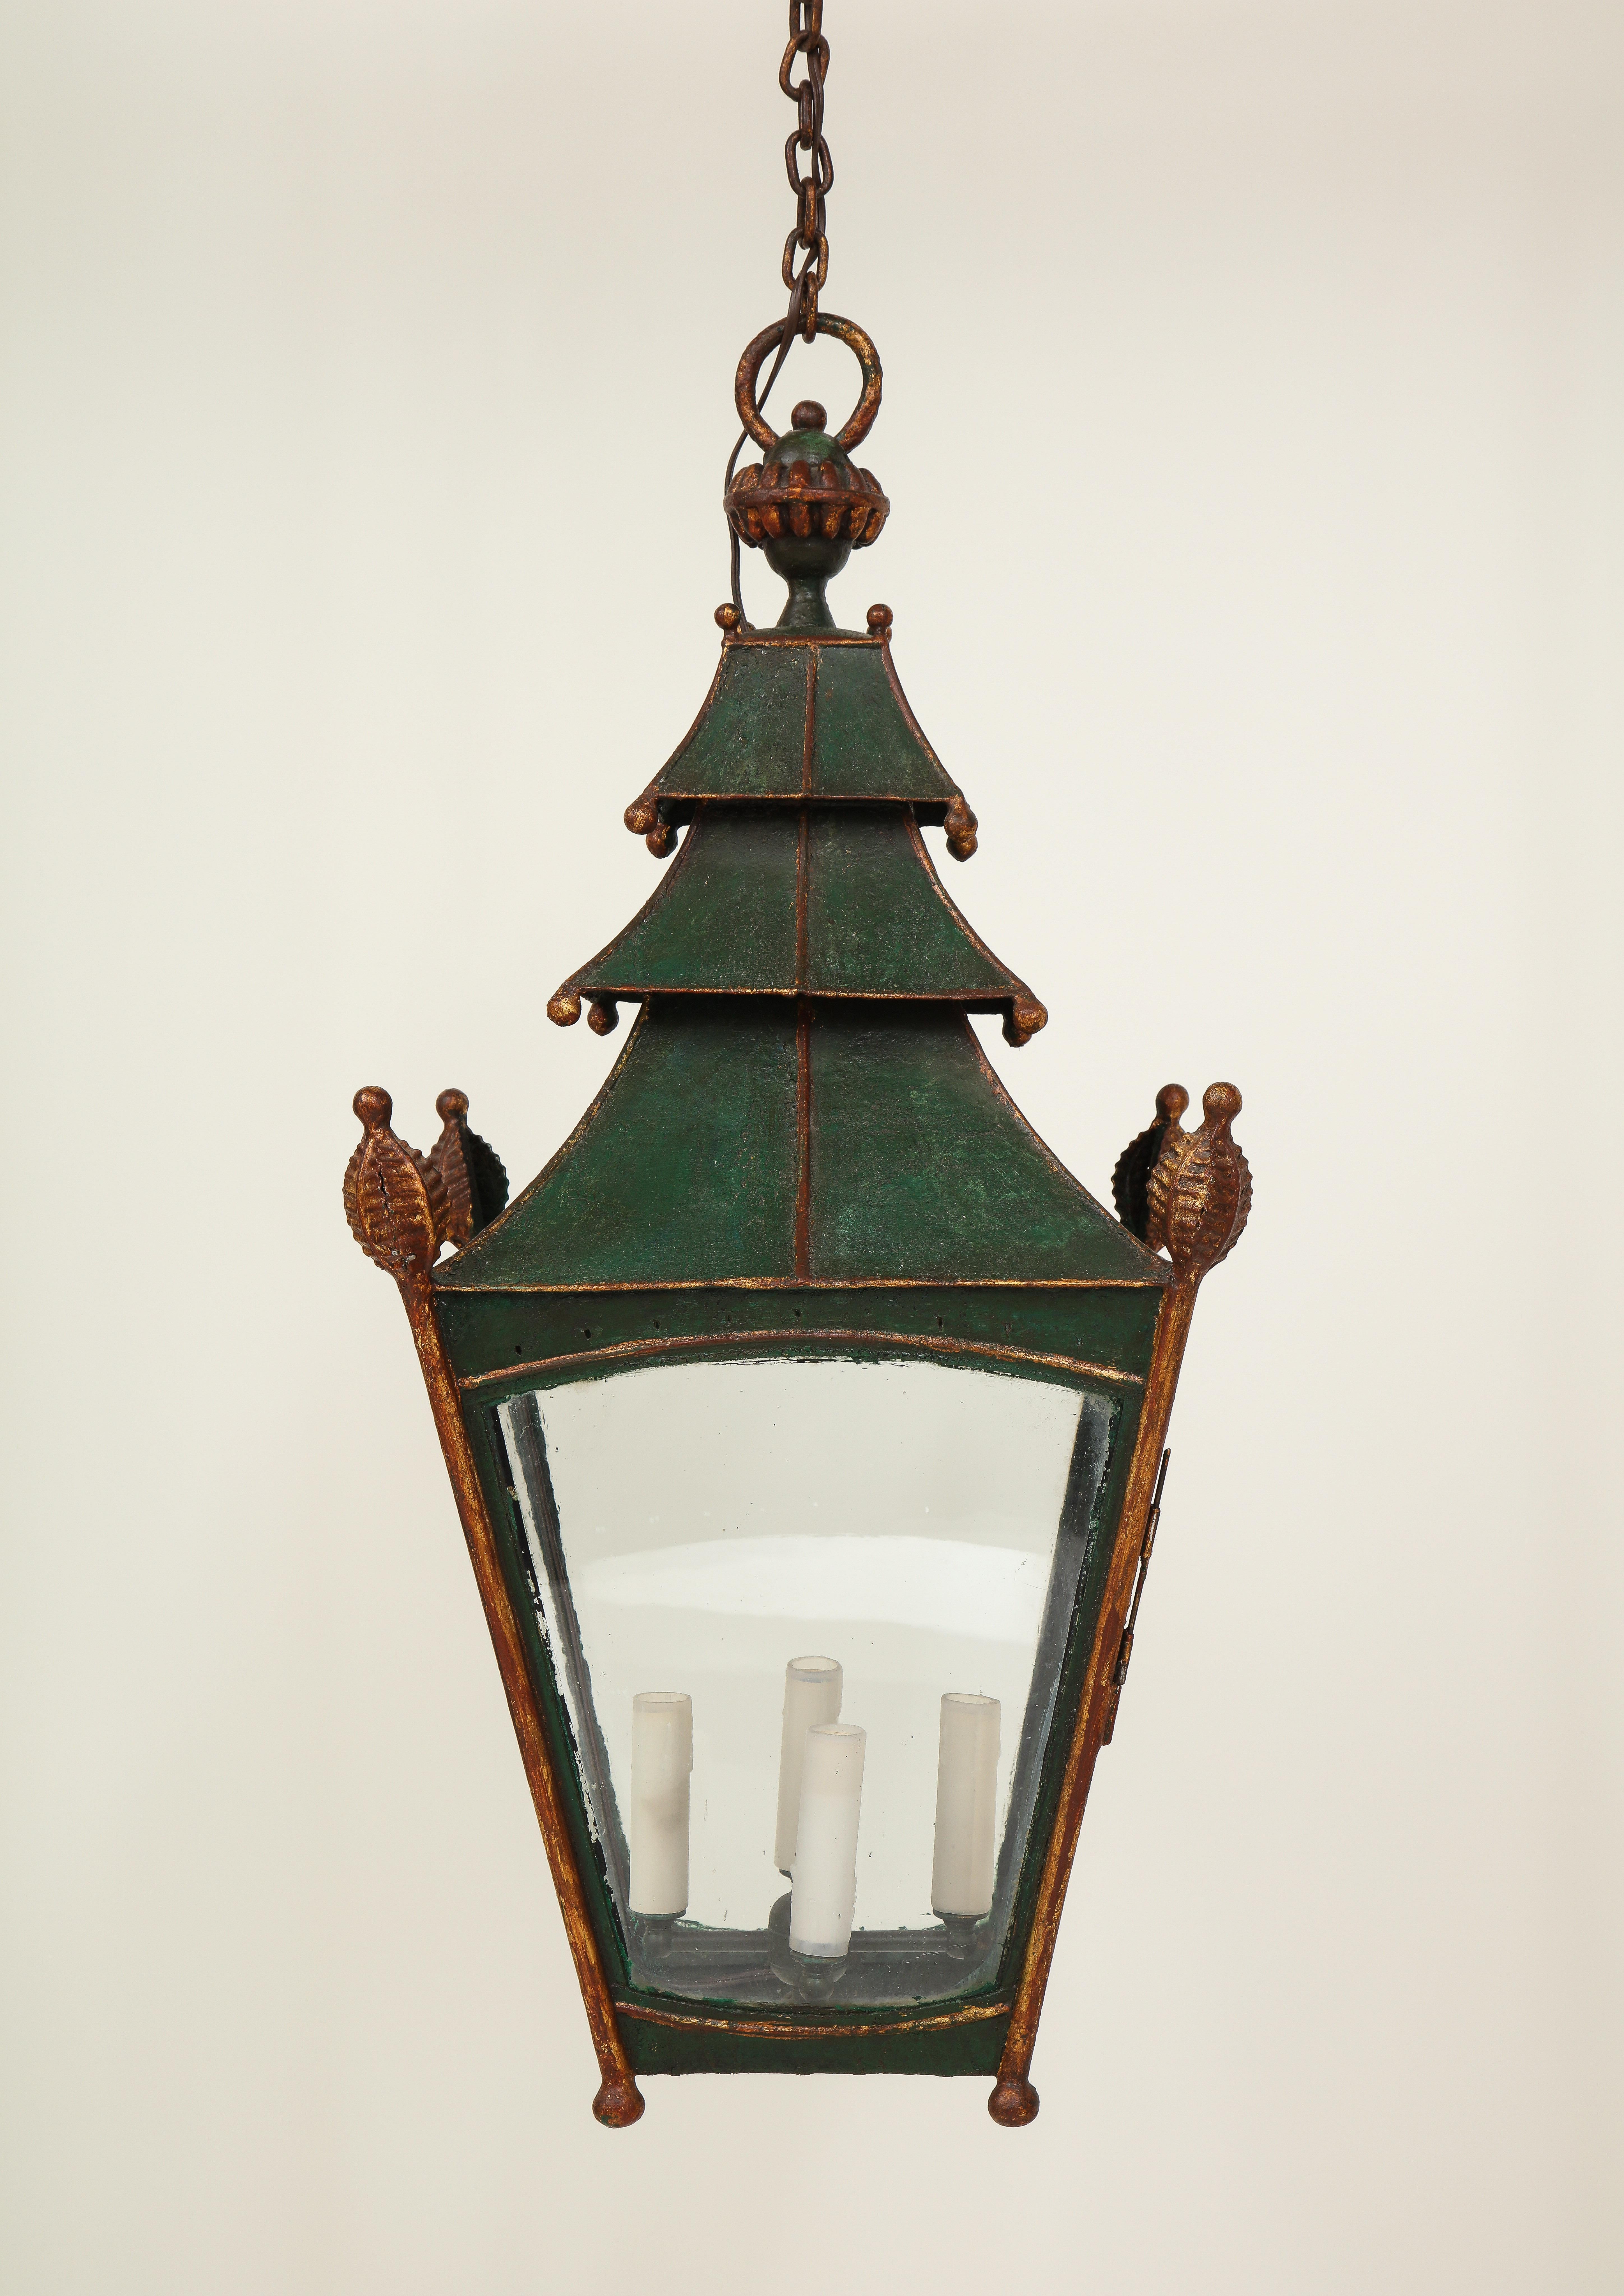 Charming rustic design. Of pagoda form and with pine cone finials; with four lights.